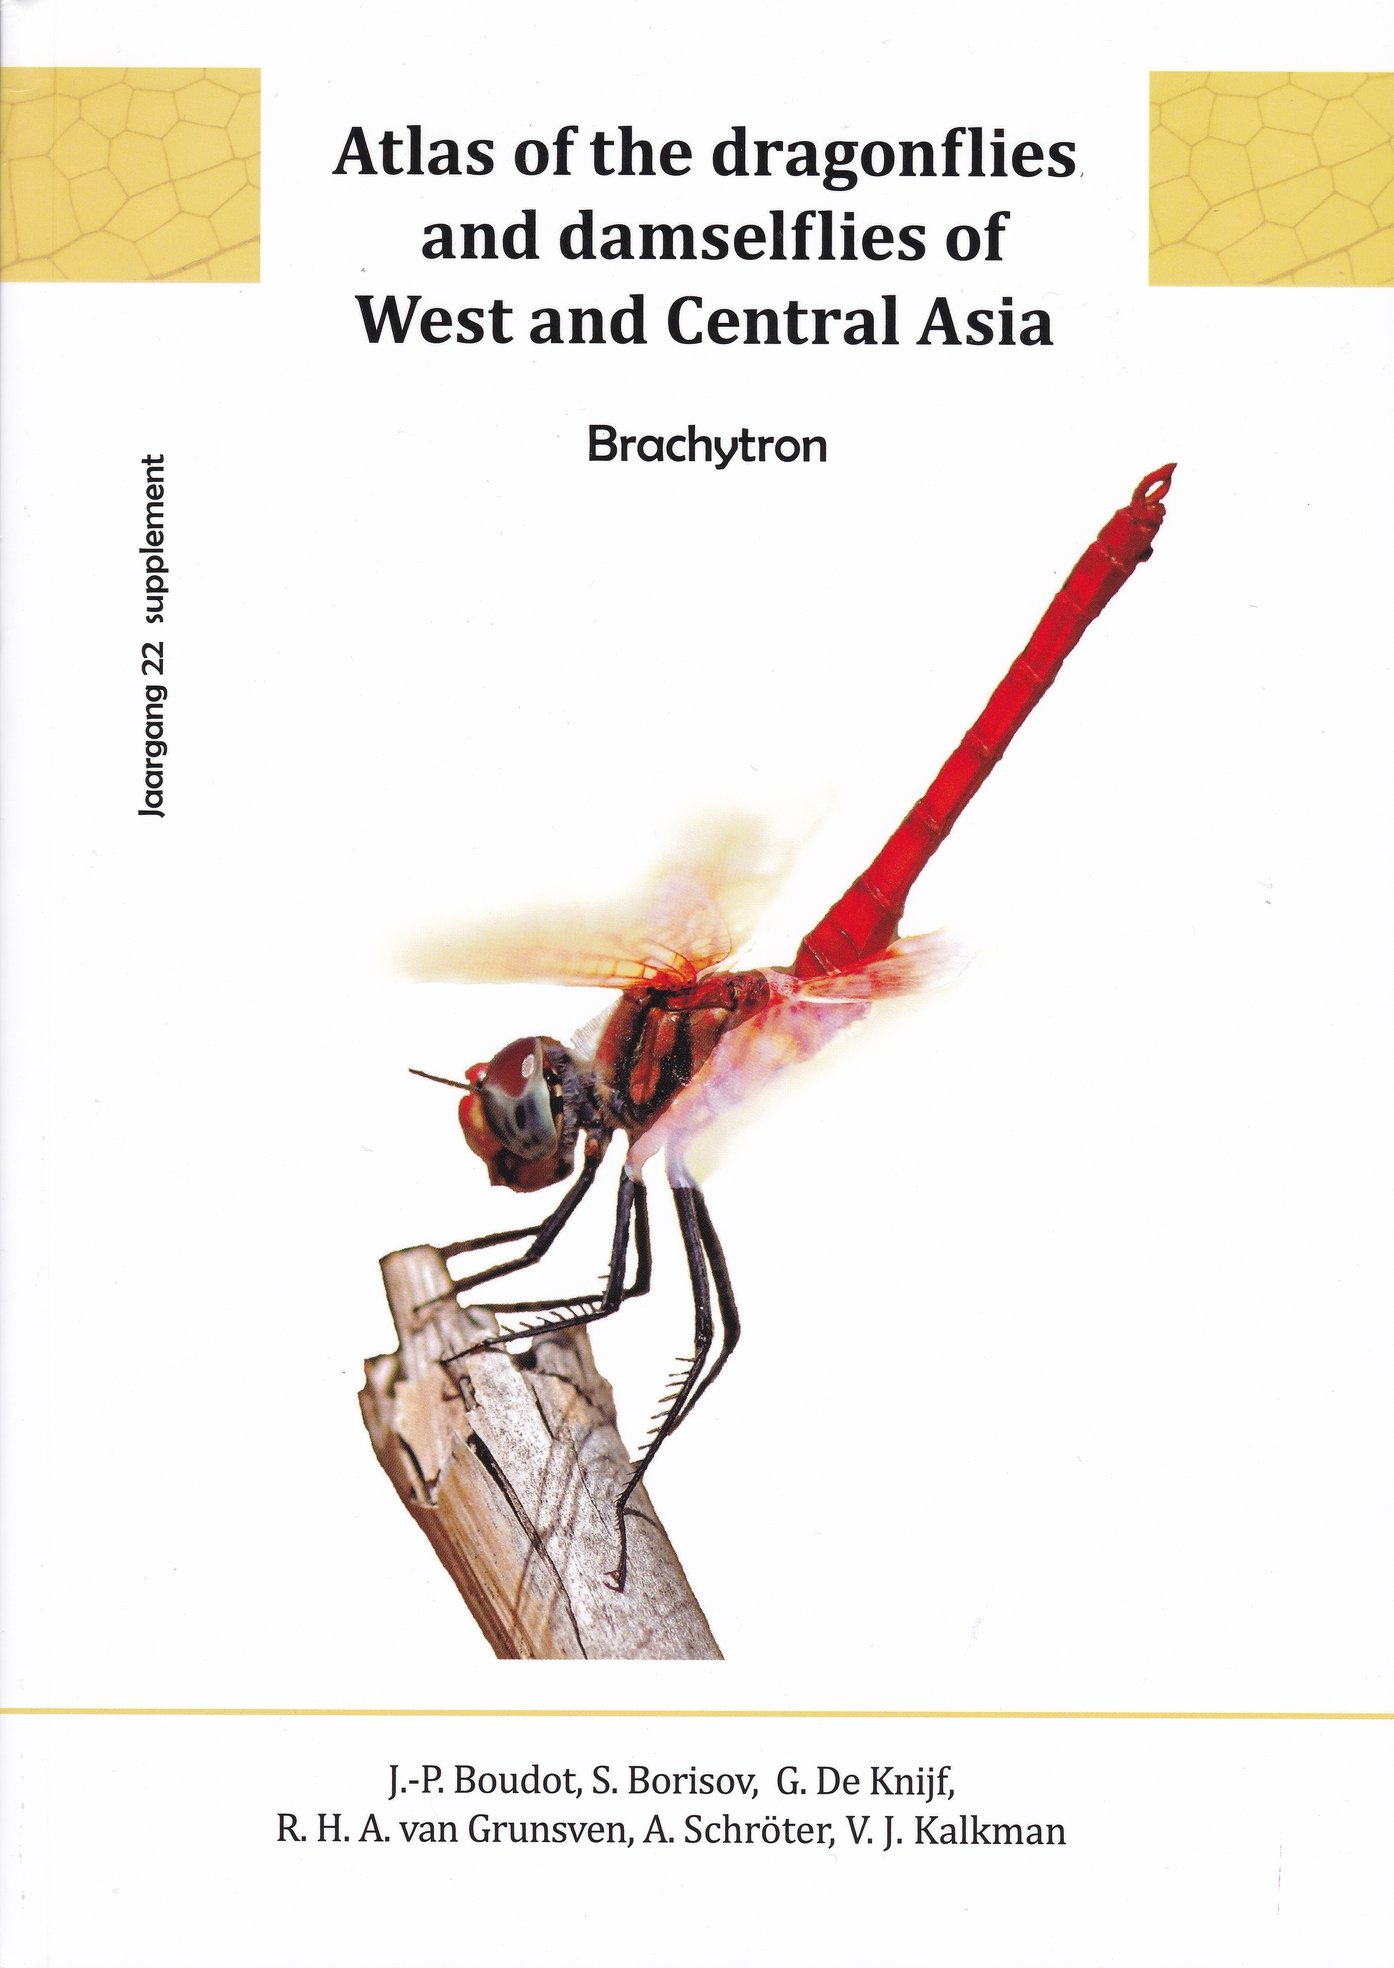 Atlas of the dragonflies and damselflies of West and Central Asia (Rippl-Rónai Múzeum CC BY-NC-ND)